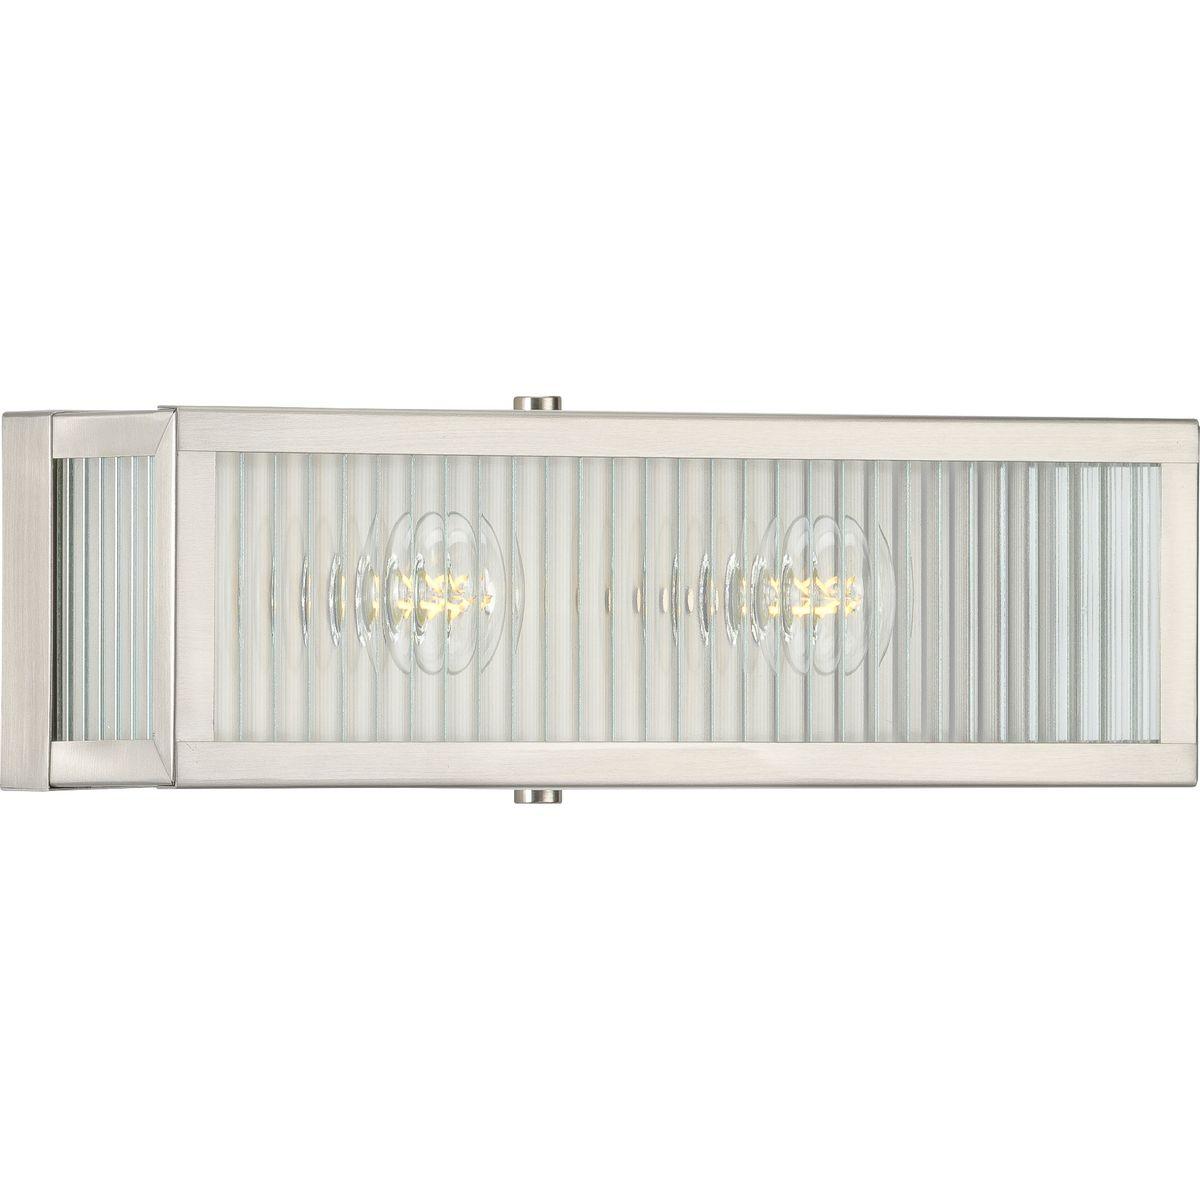 Hubbell P300265-135 Incorporate a vintage feel with a dash of industrial personality with this two-light bath. An attention-grabbing, clear ribbed glass takes center stage in the design to create a gaslight glow when the fixture is illuminated. A simple, metal frame coated i